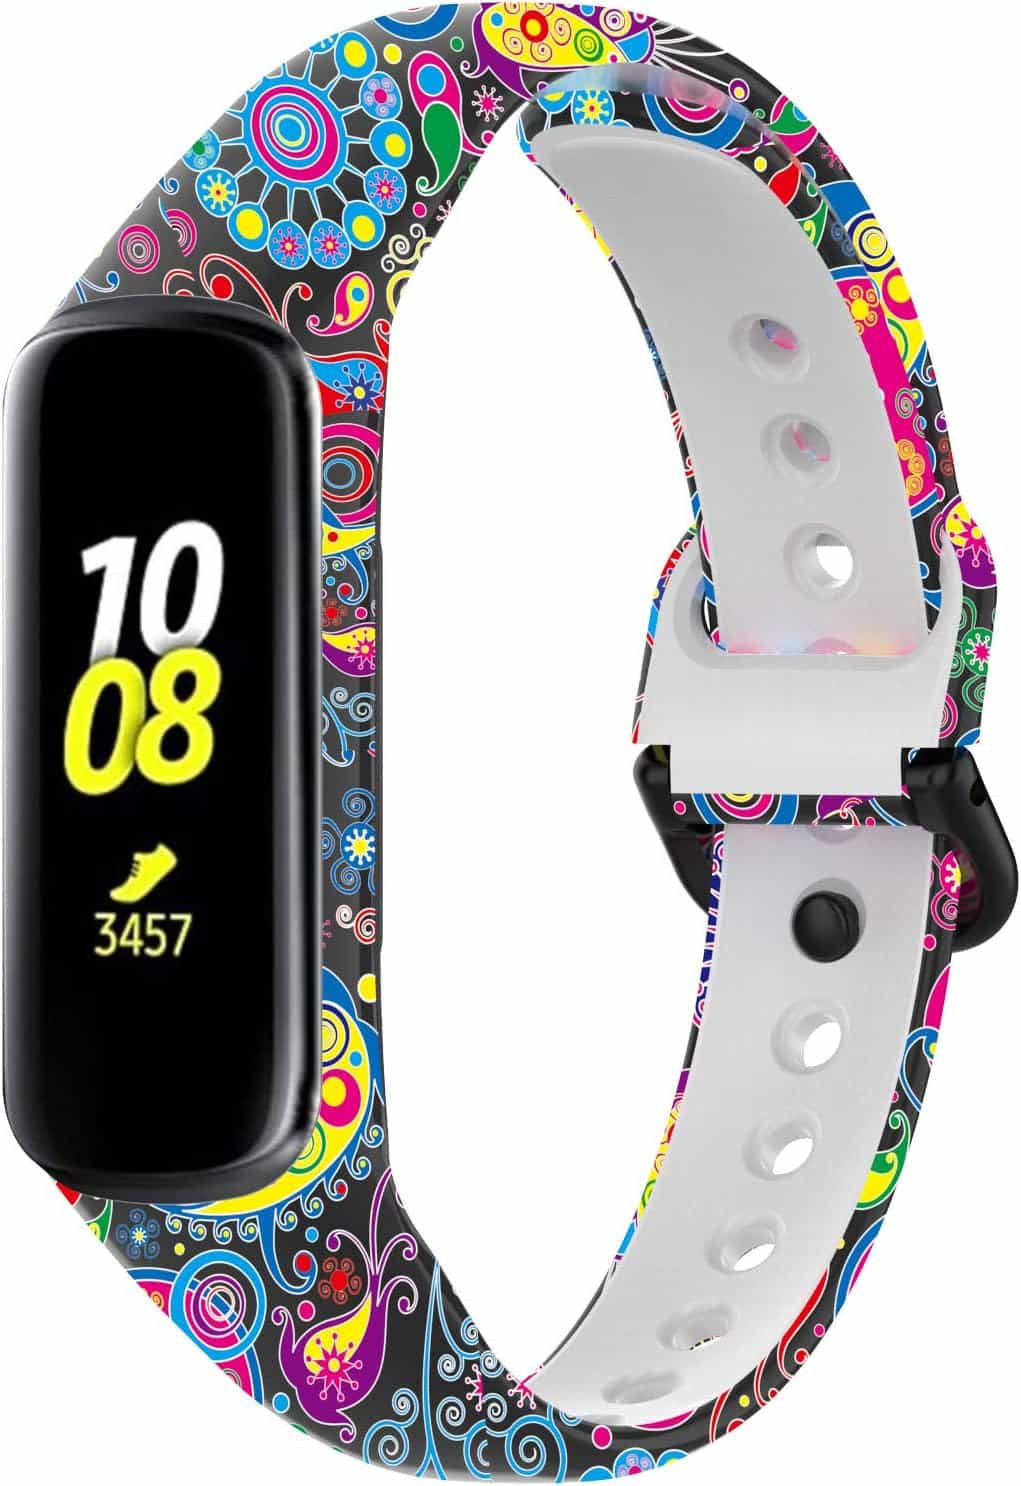 Enhance Your Style with Replacement Bands Compatible with Samsung Galaxy Fit2 SM-R220